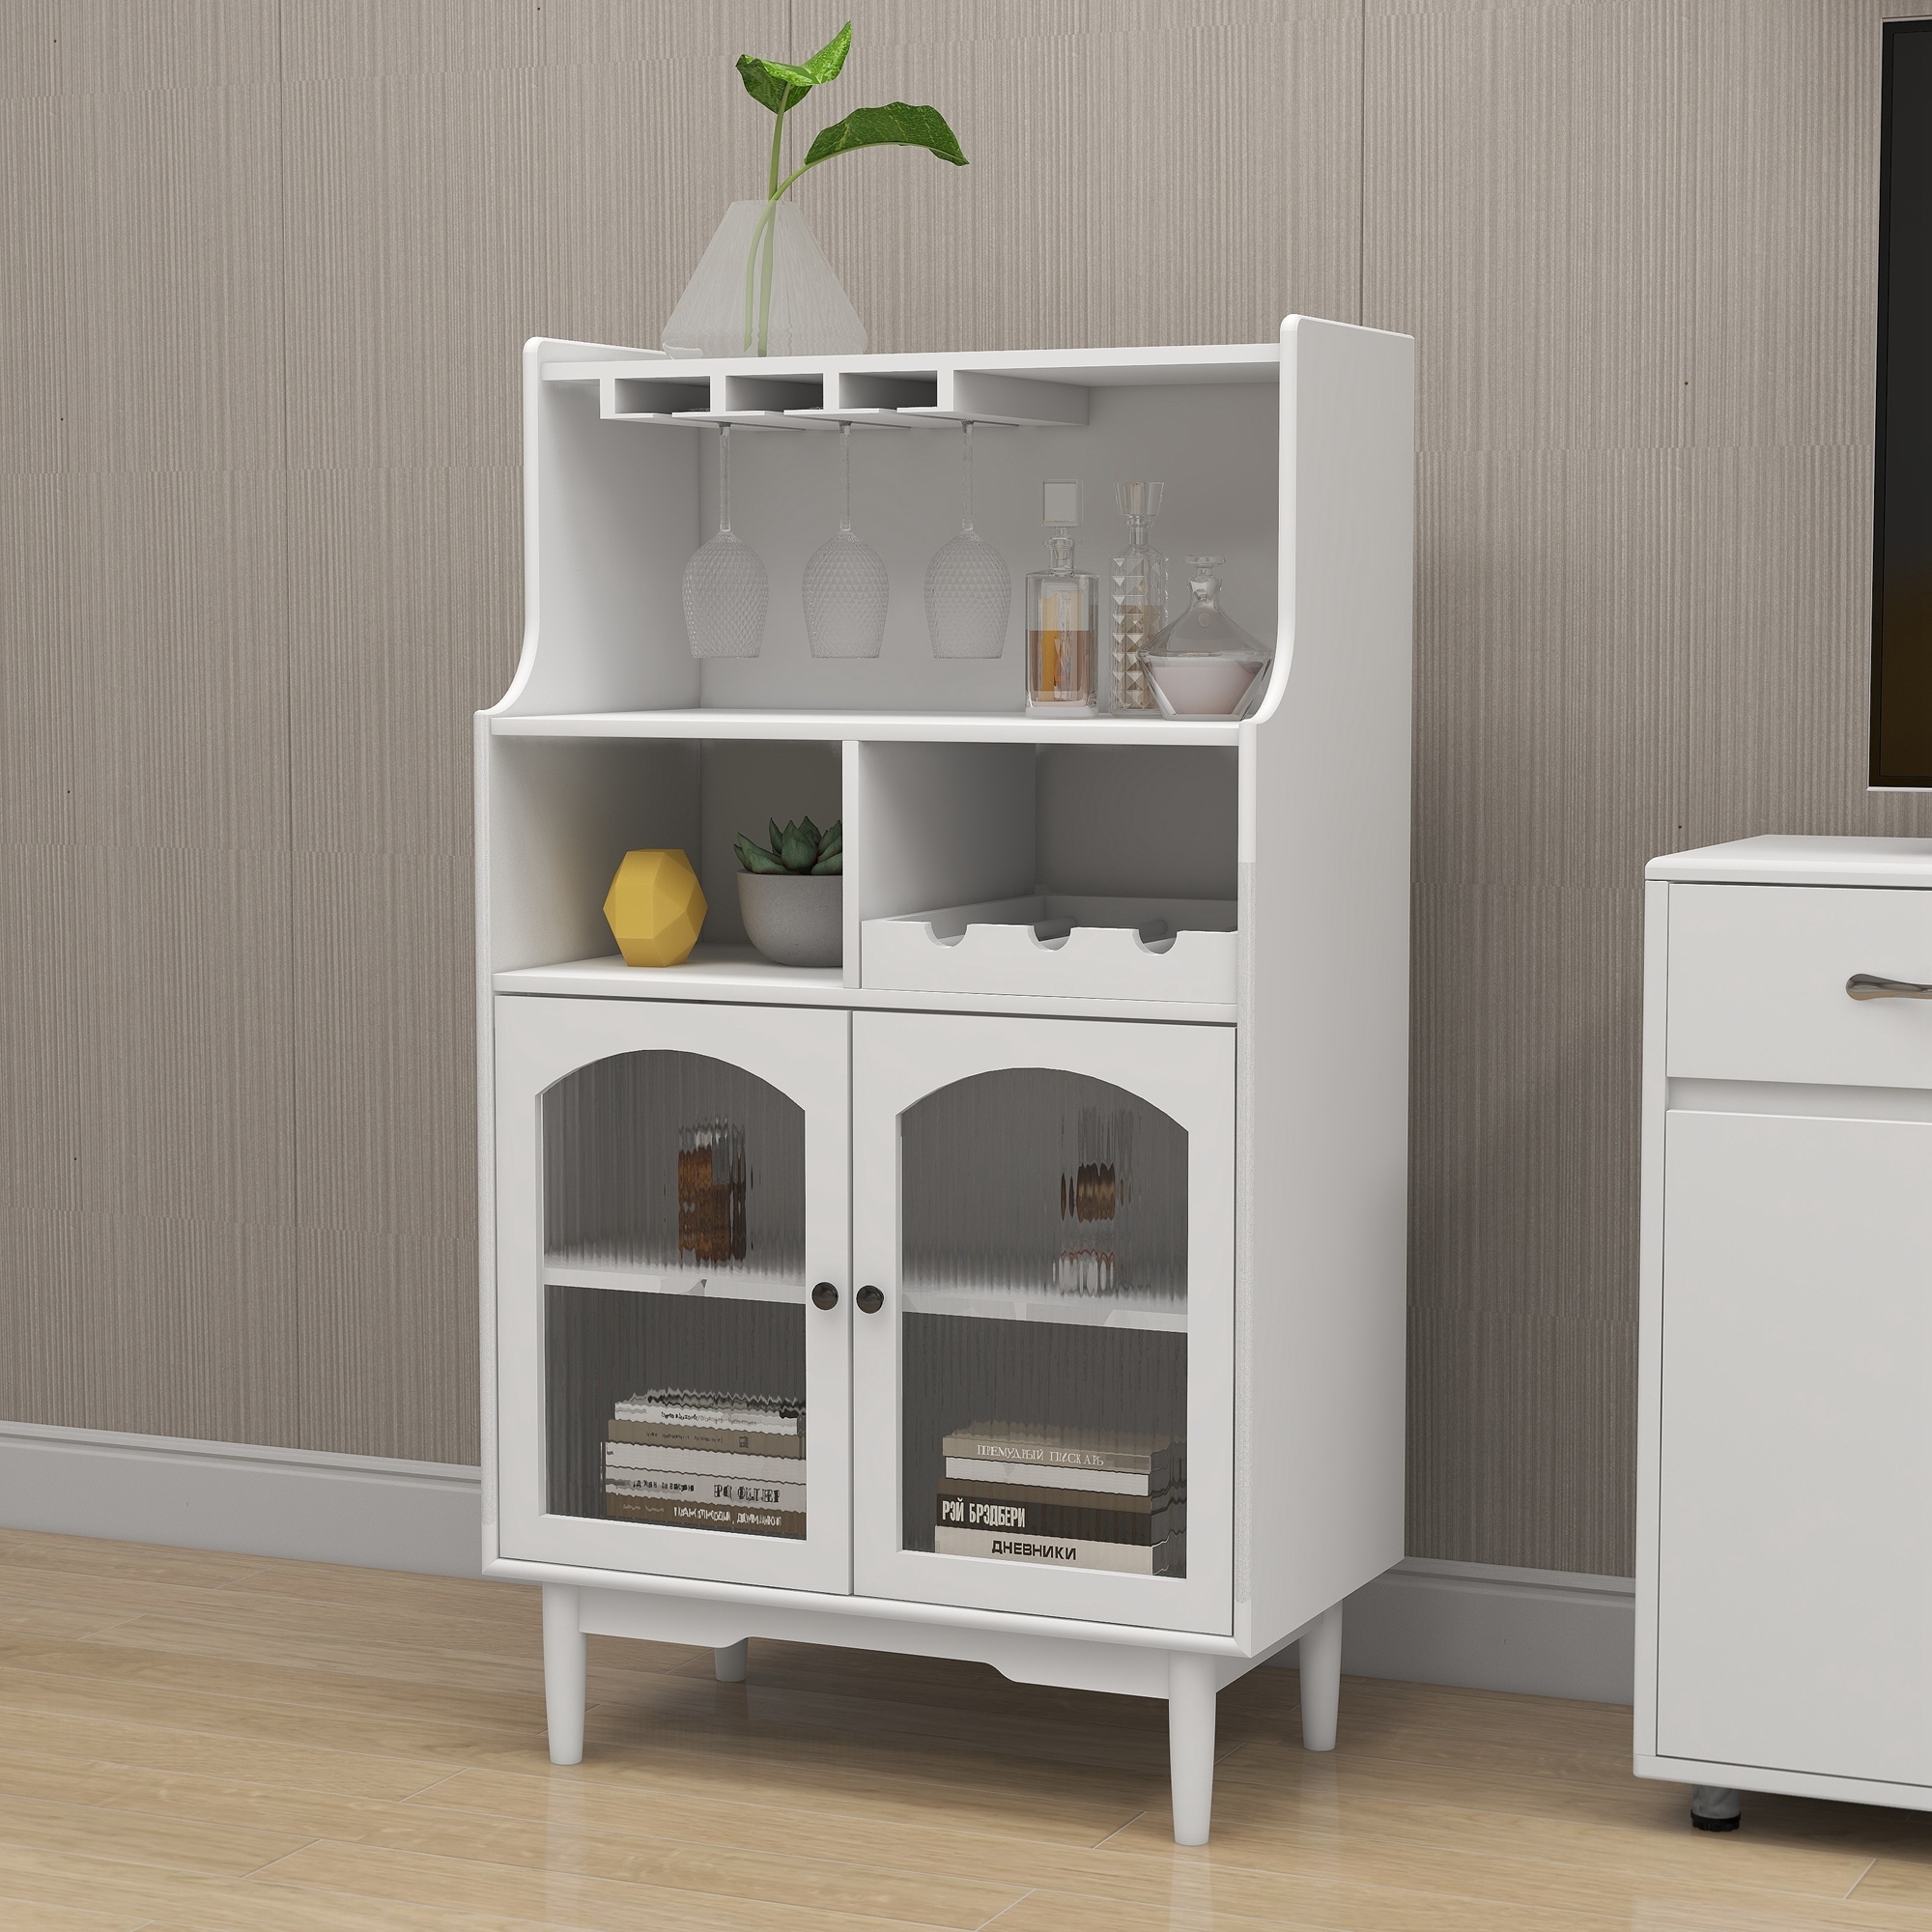 https://ak1.ostkcdn.com/images/products/is/images/direct/2445b2bfe914c1d6302ea49ba31420270dc5fbde/White-wine-cabinet-with-removable-wine-rack-and-wine-glass-rack%2C-a-glass-door-cabinet.jpg